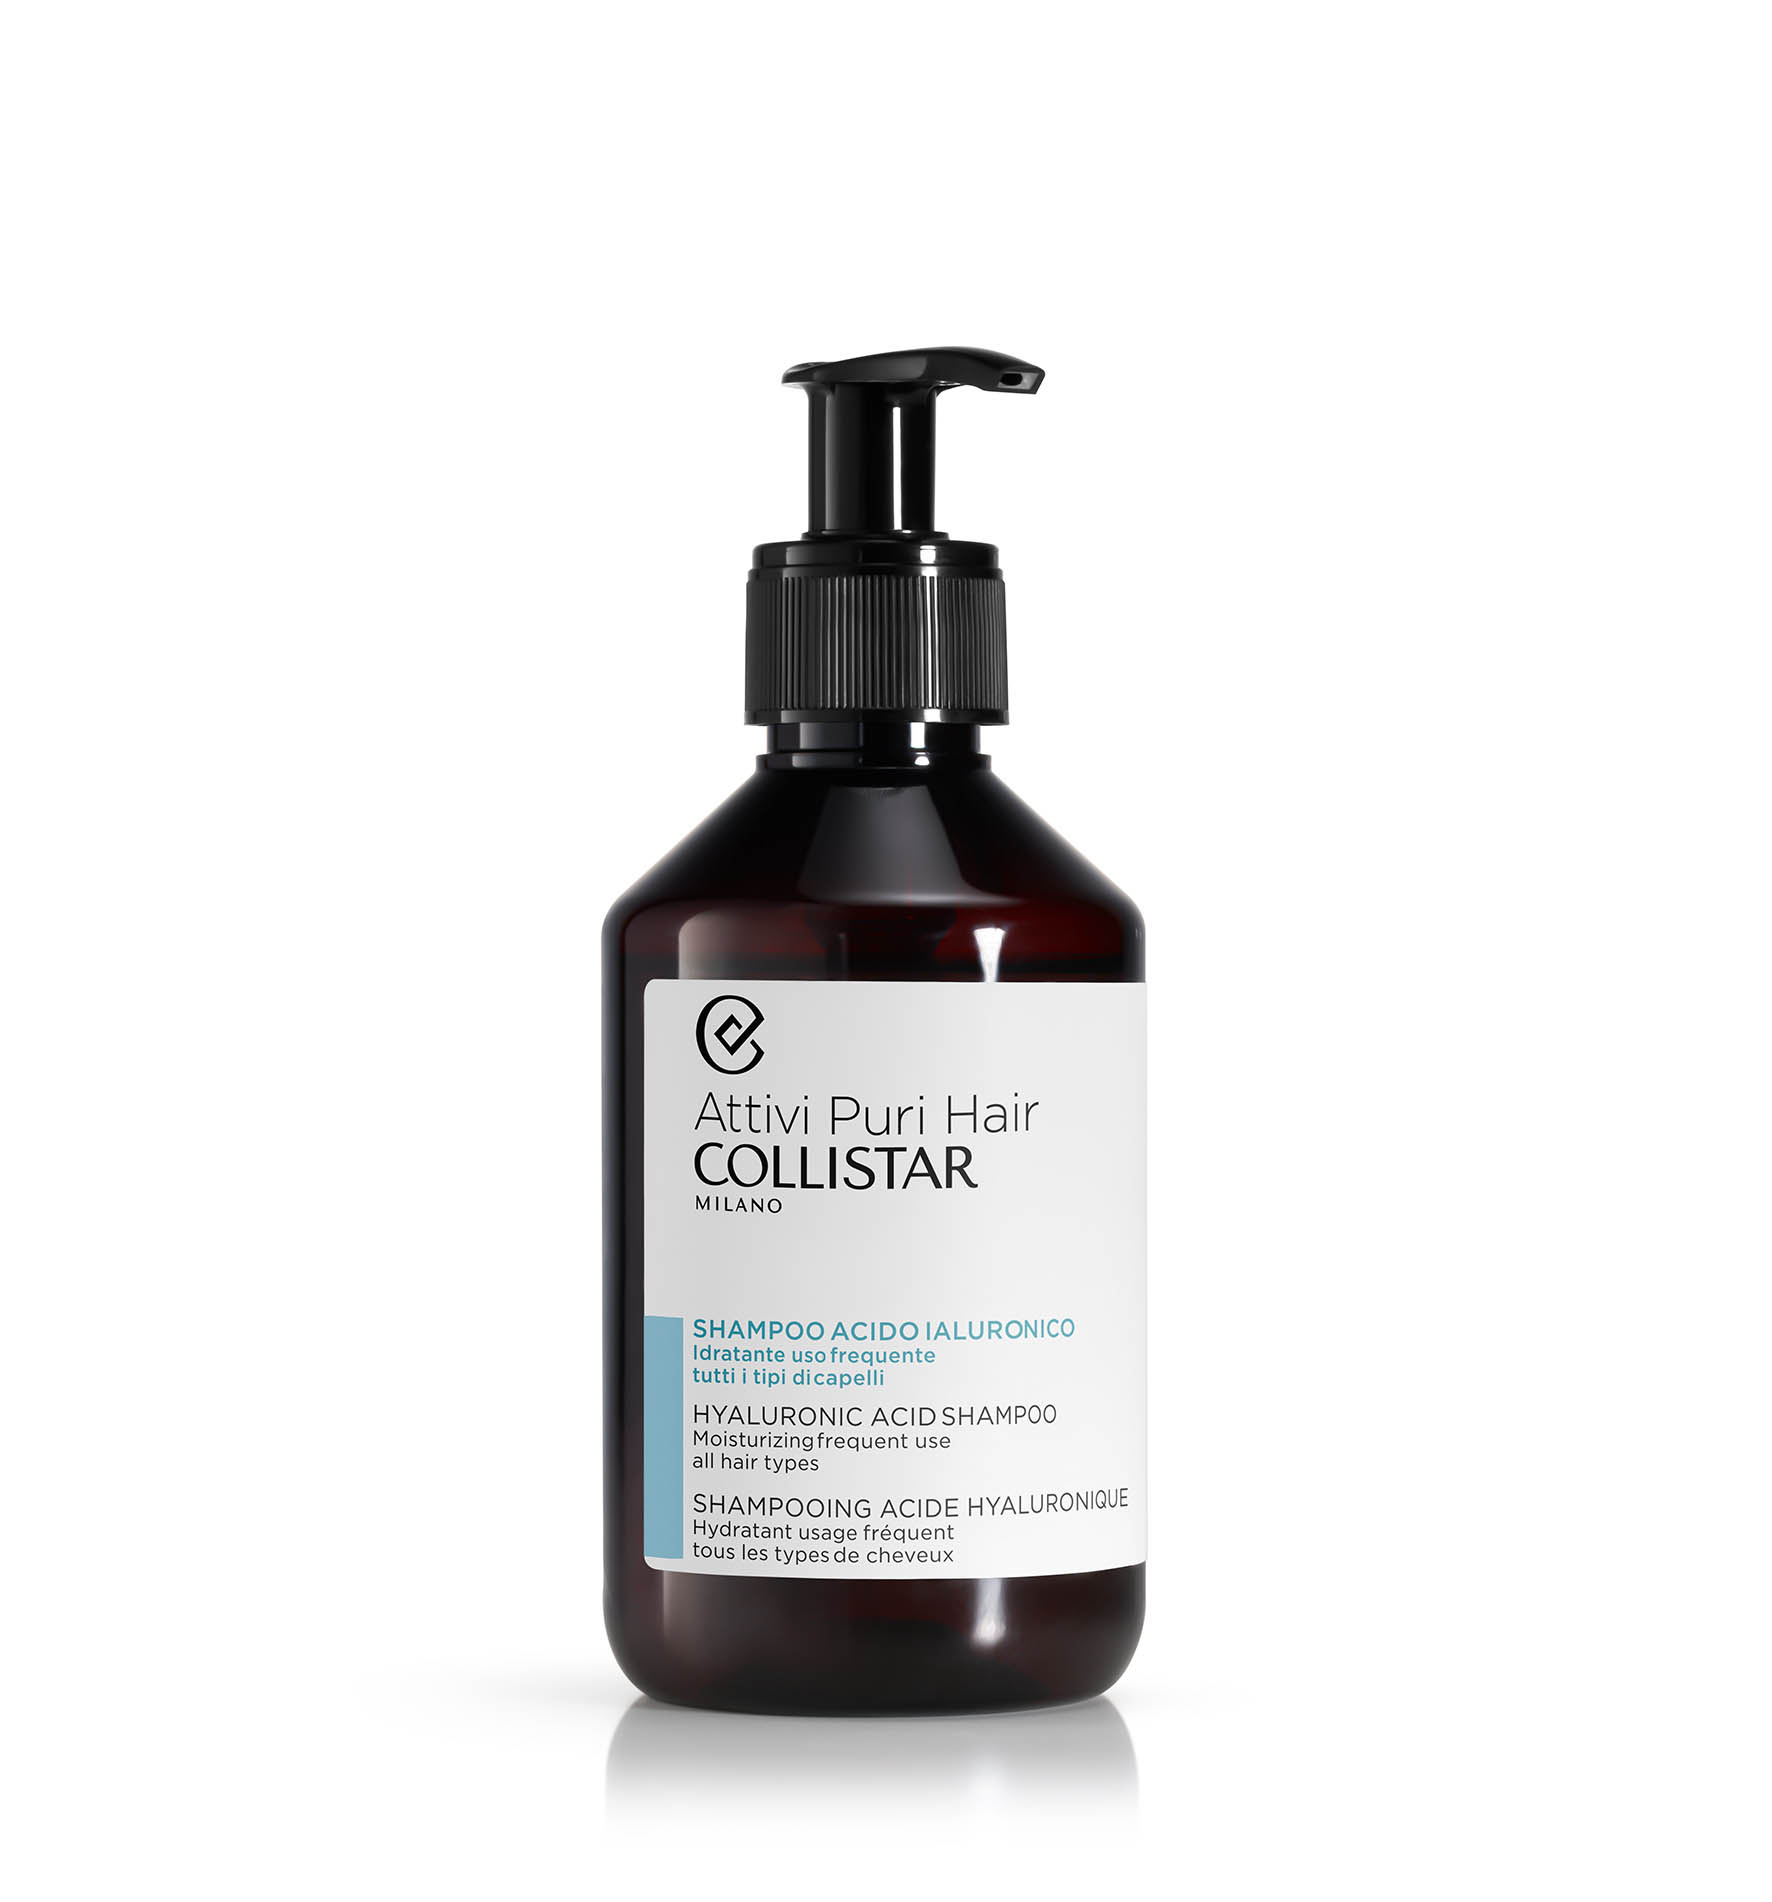 SHAMPOING ACIDE HYALURONIQUE - Frequent Washing | Collistar - Shop Online Ufficiale